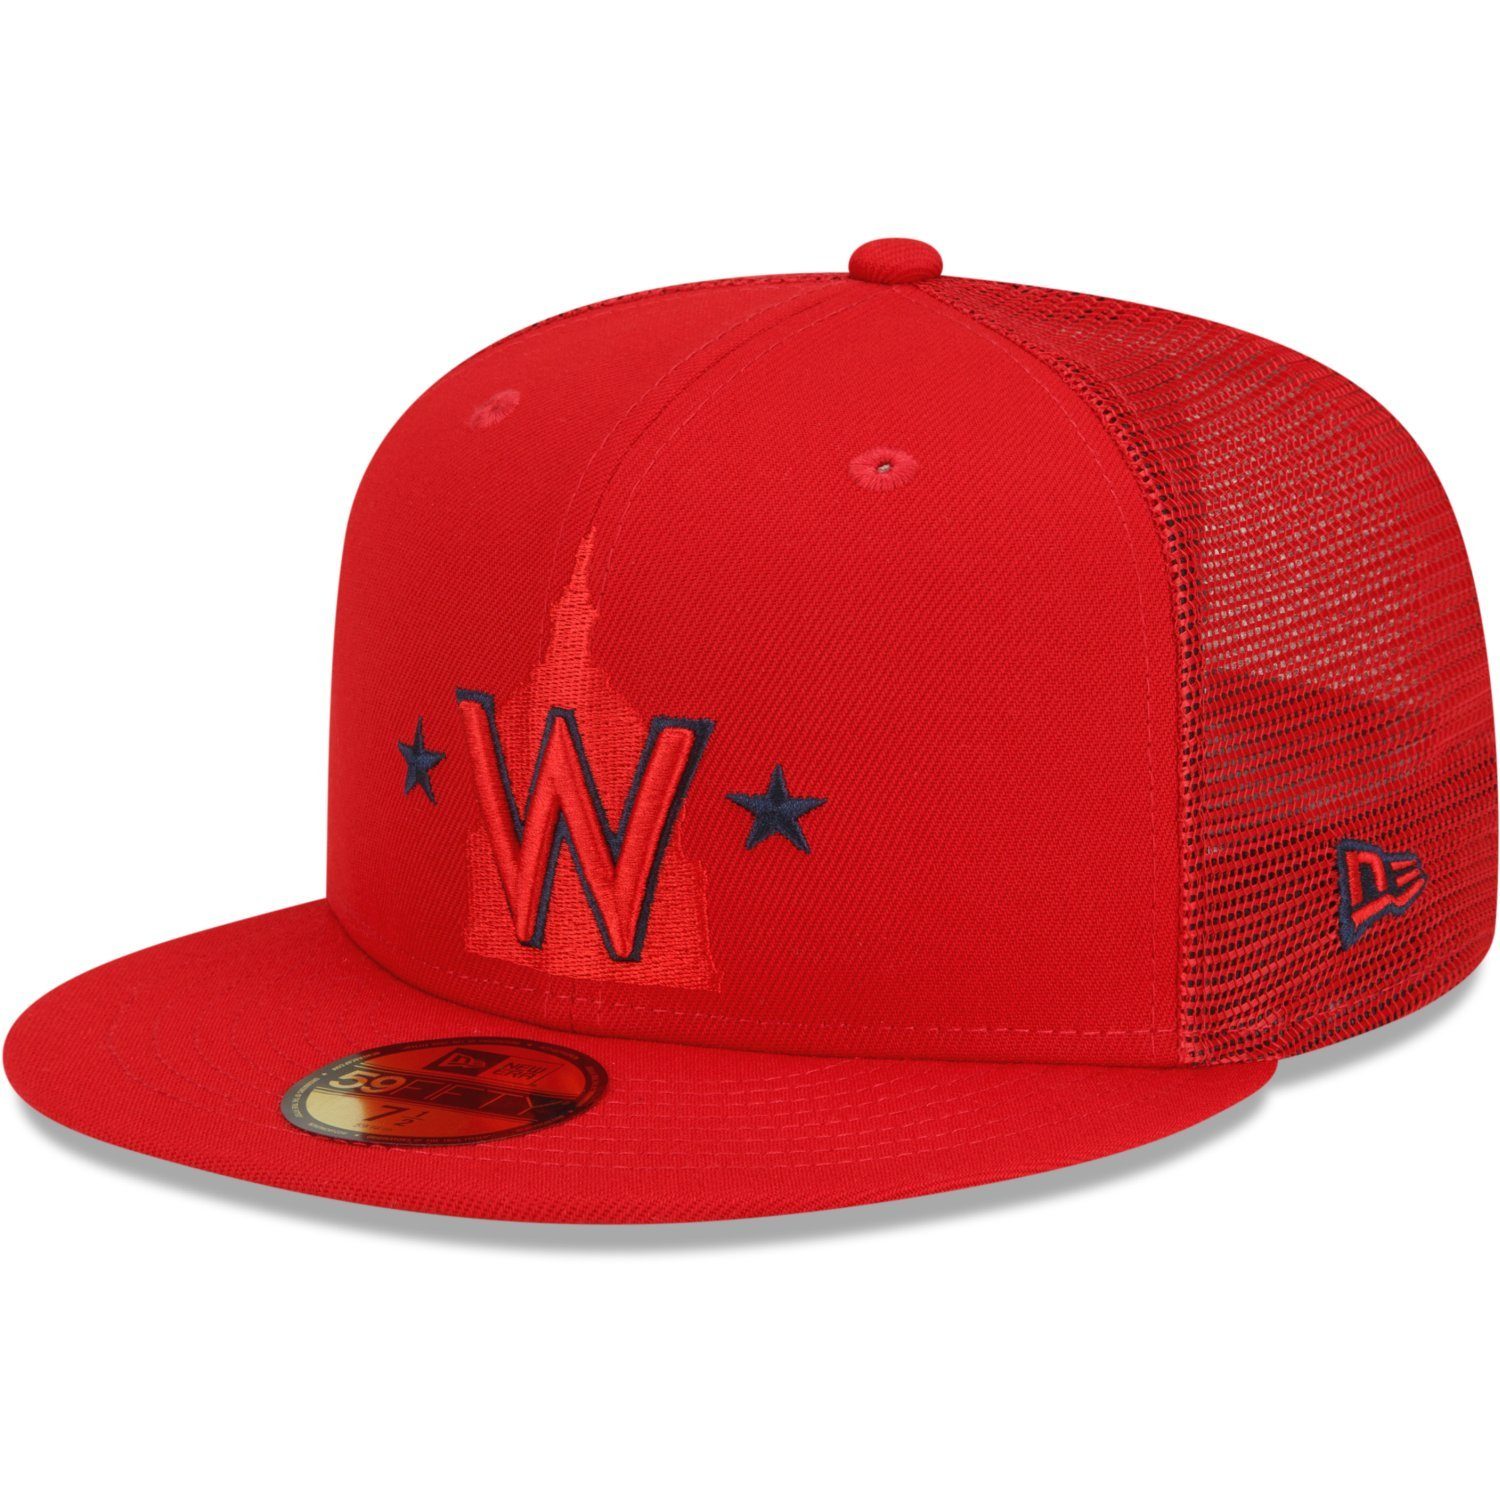 New Era Fitted Cap 59Fifty BATTING PRACTICE Washington Nationals